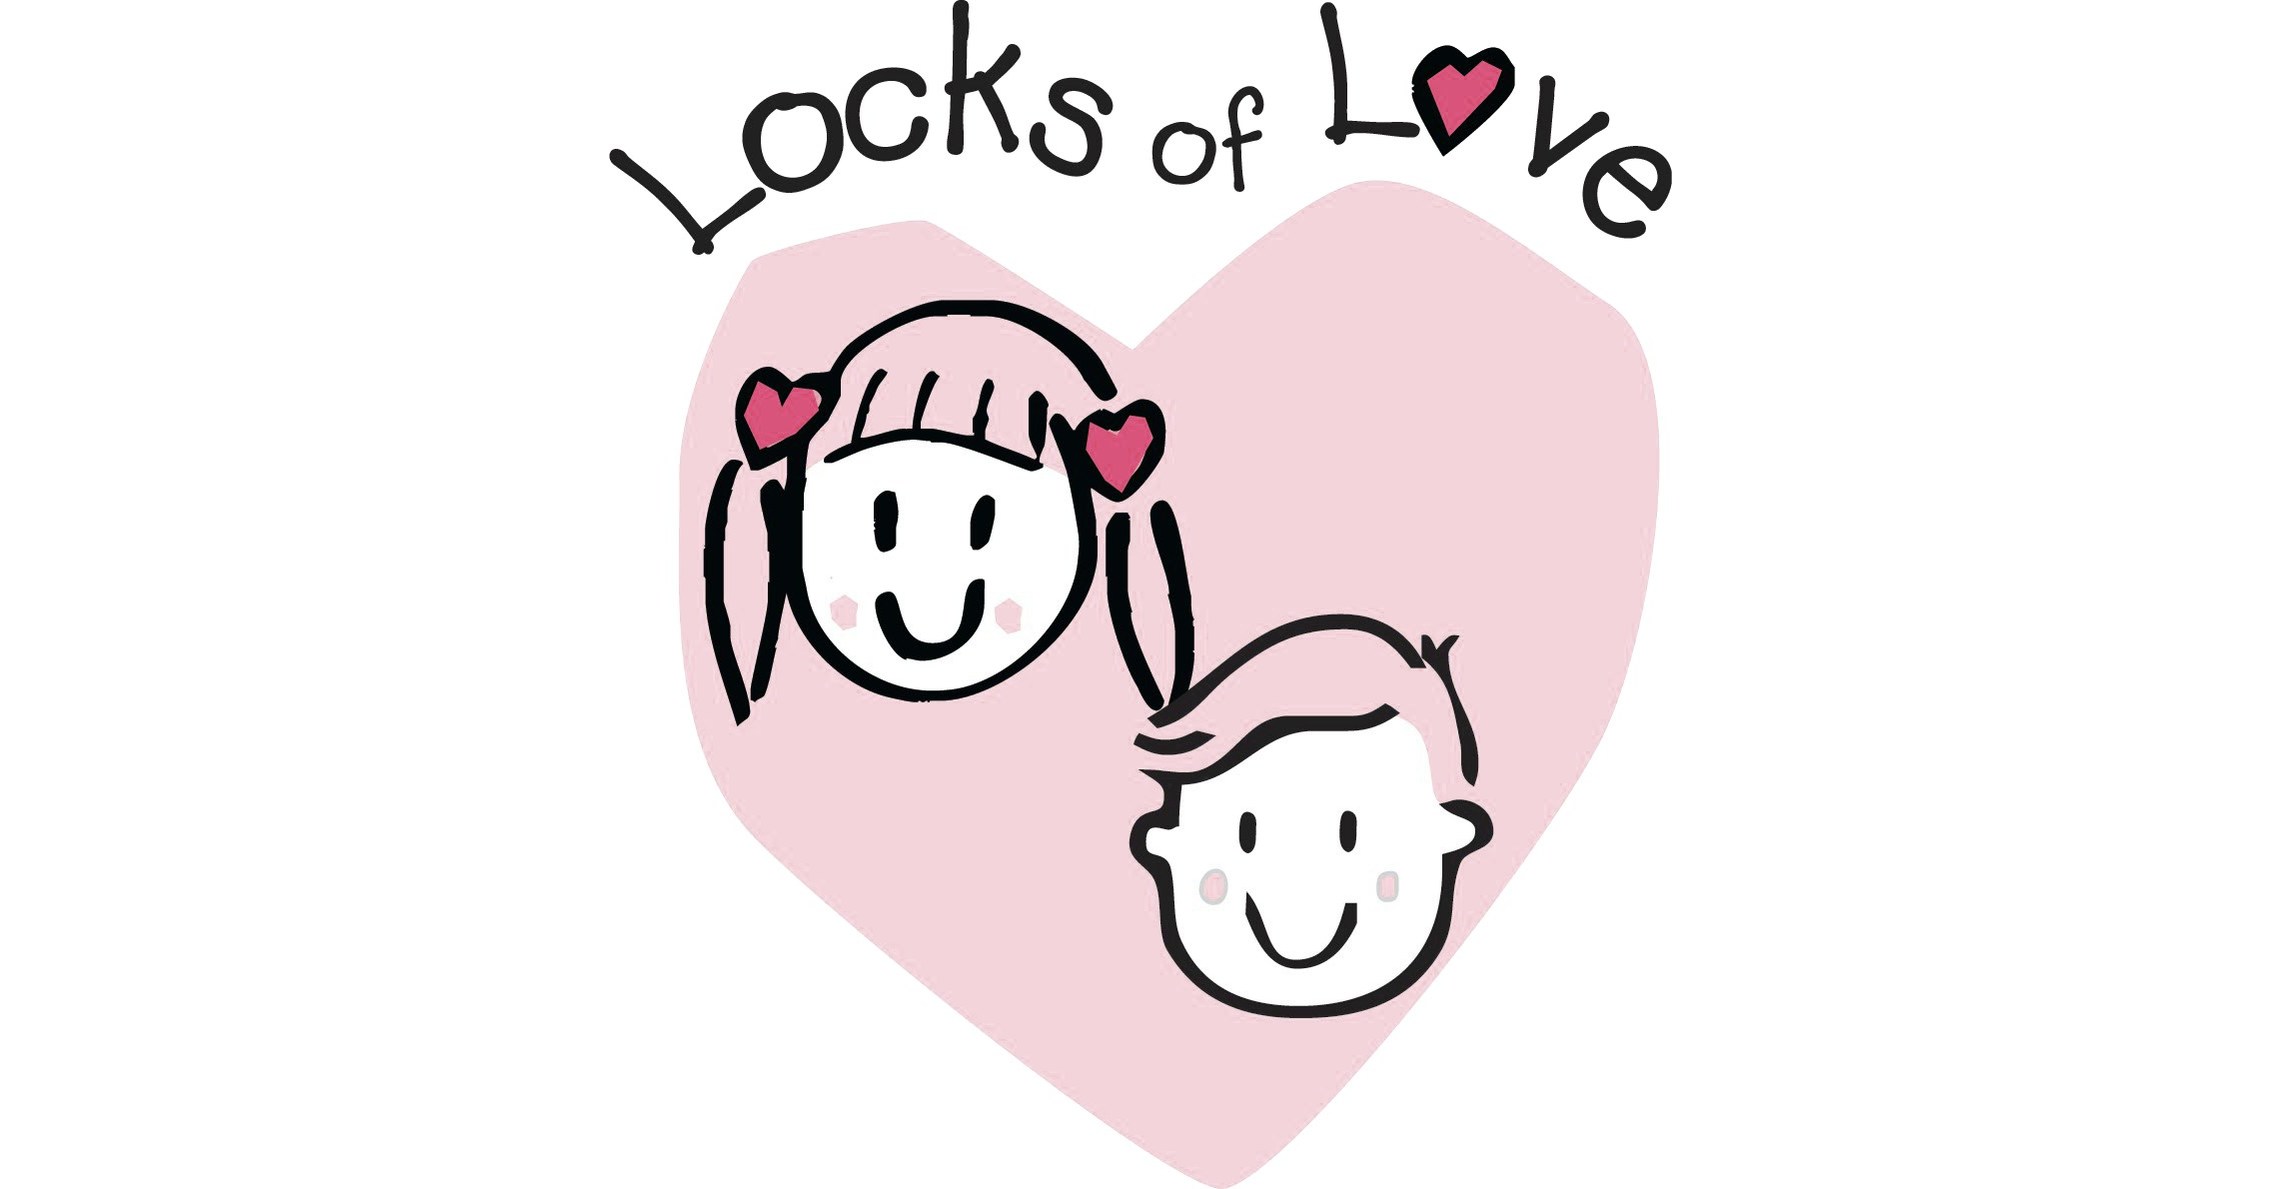 9-surprising-facts-about-locks-of-love